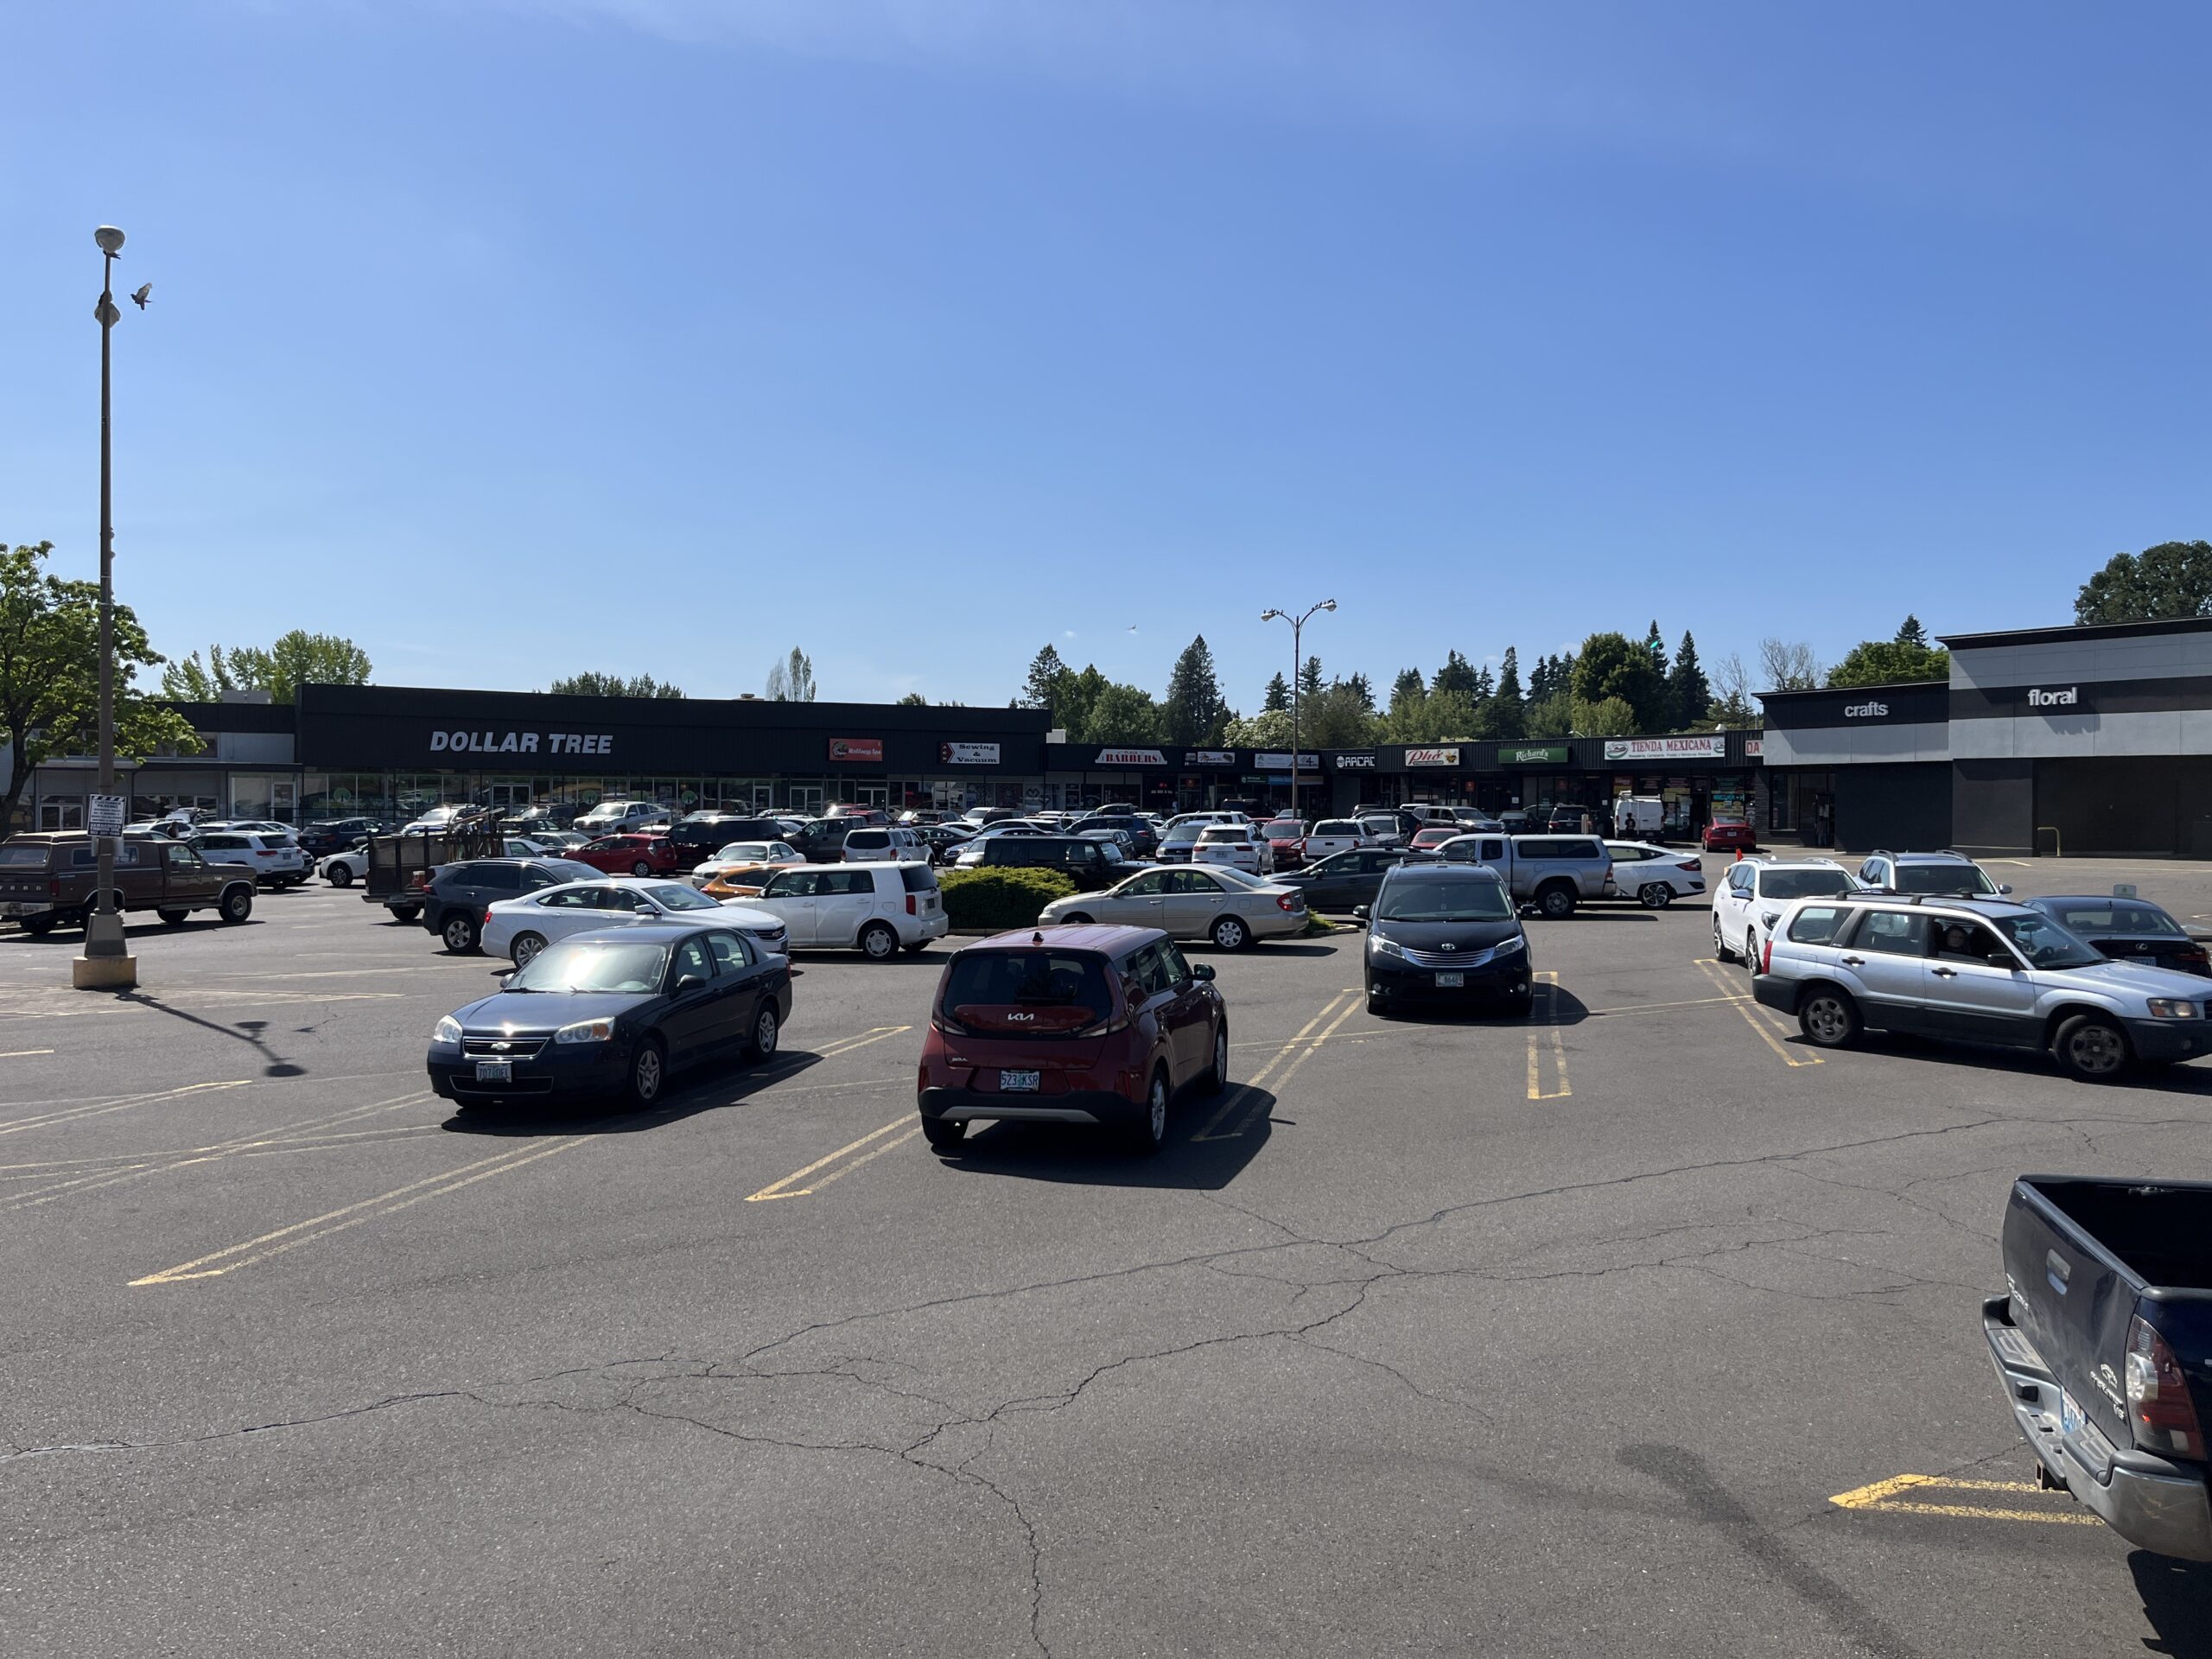 A Business Case for Dropping Parking Minimums